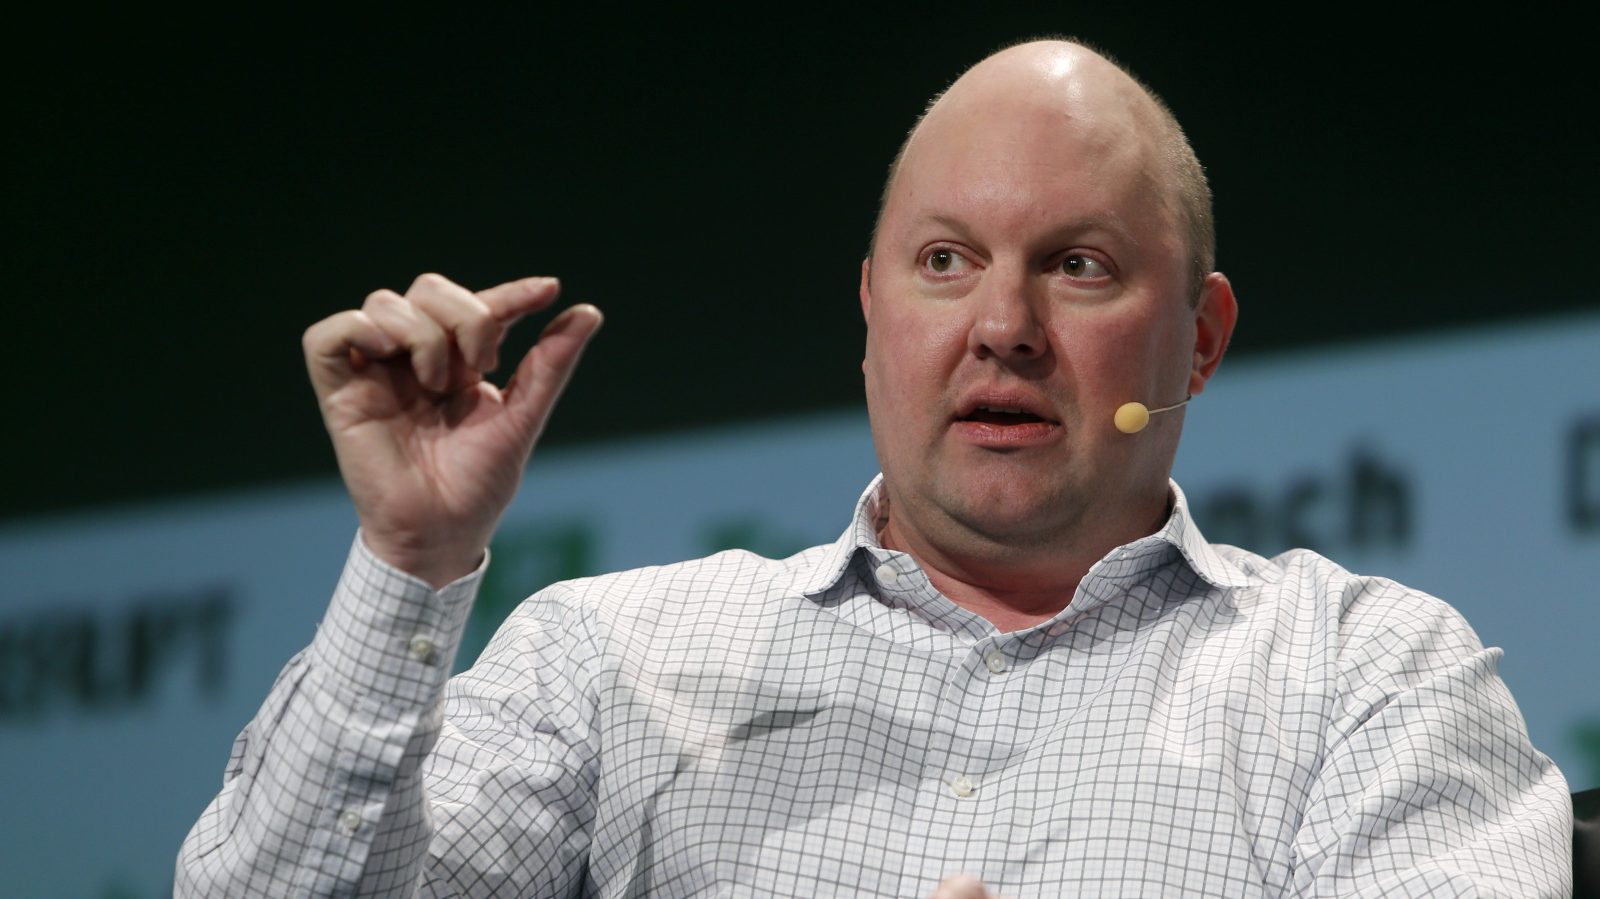 Venture capitalist Marc Andreessen speaks at the TechCrunch Disrupt conference in San Francisco, Calif. on Tuesday, Sept. 13, 2016